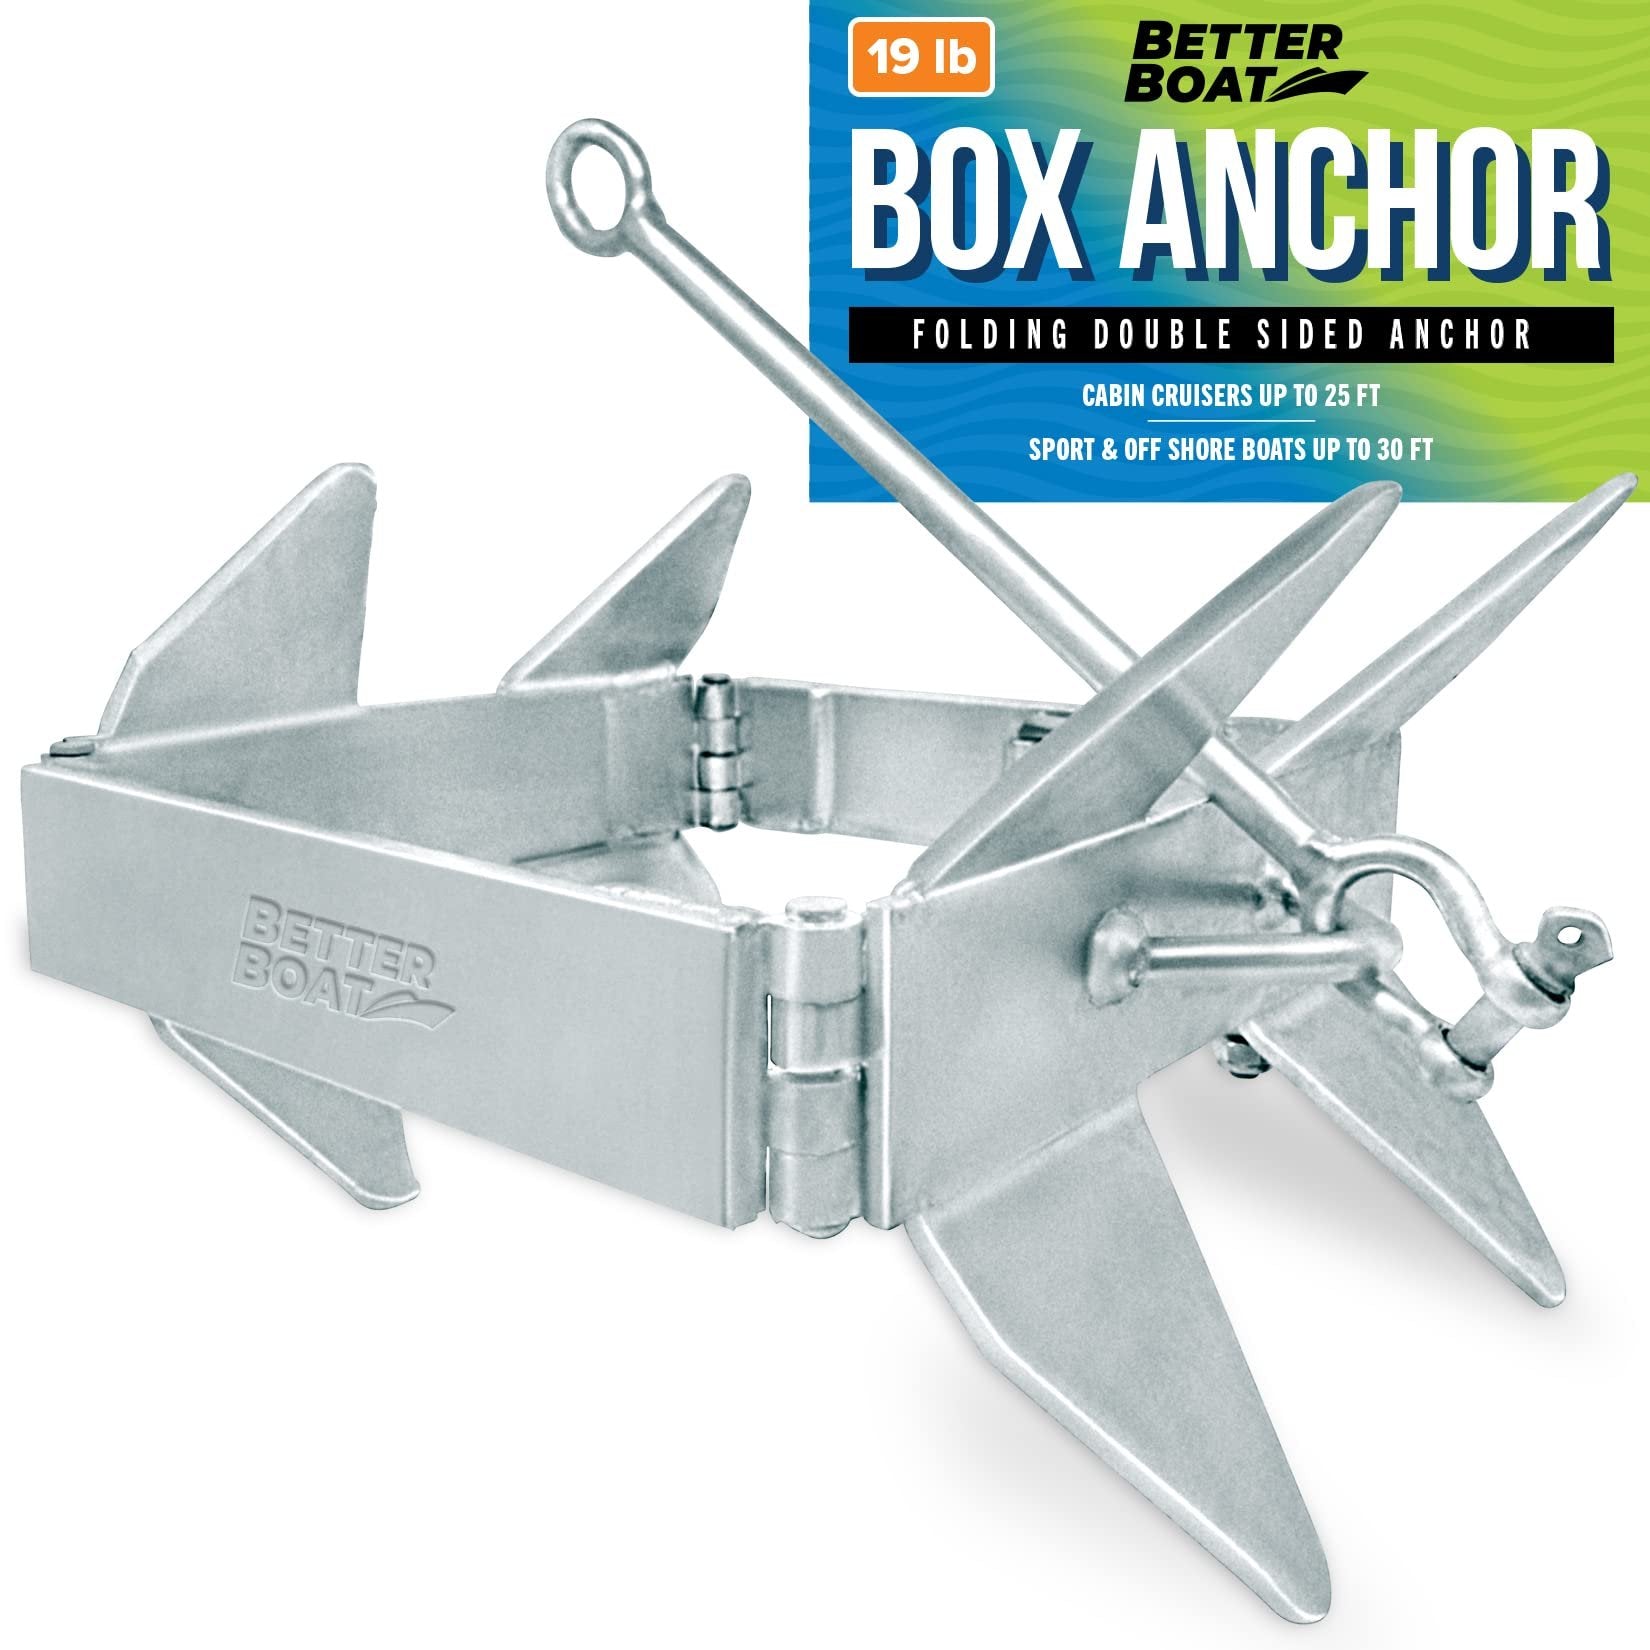 Boat Box Anchor for Boats Small and Large Folding Anchor Prevents Anchor Slide 19lb and 26lb up to 22, 23 Foot or 25' Boats Pontoon, Fishing or Cabin Cruisers Hot Dipped Galvanized Boat Anchors 19lb